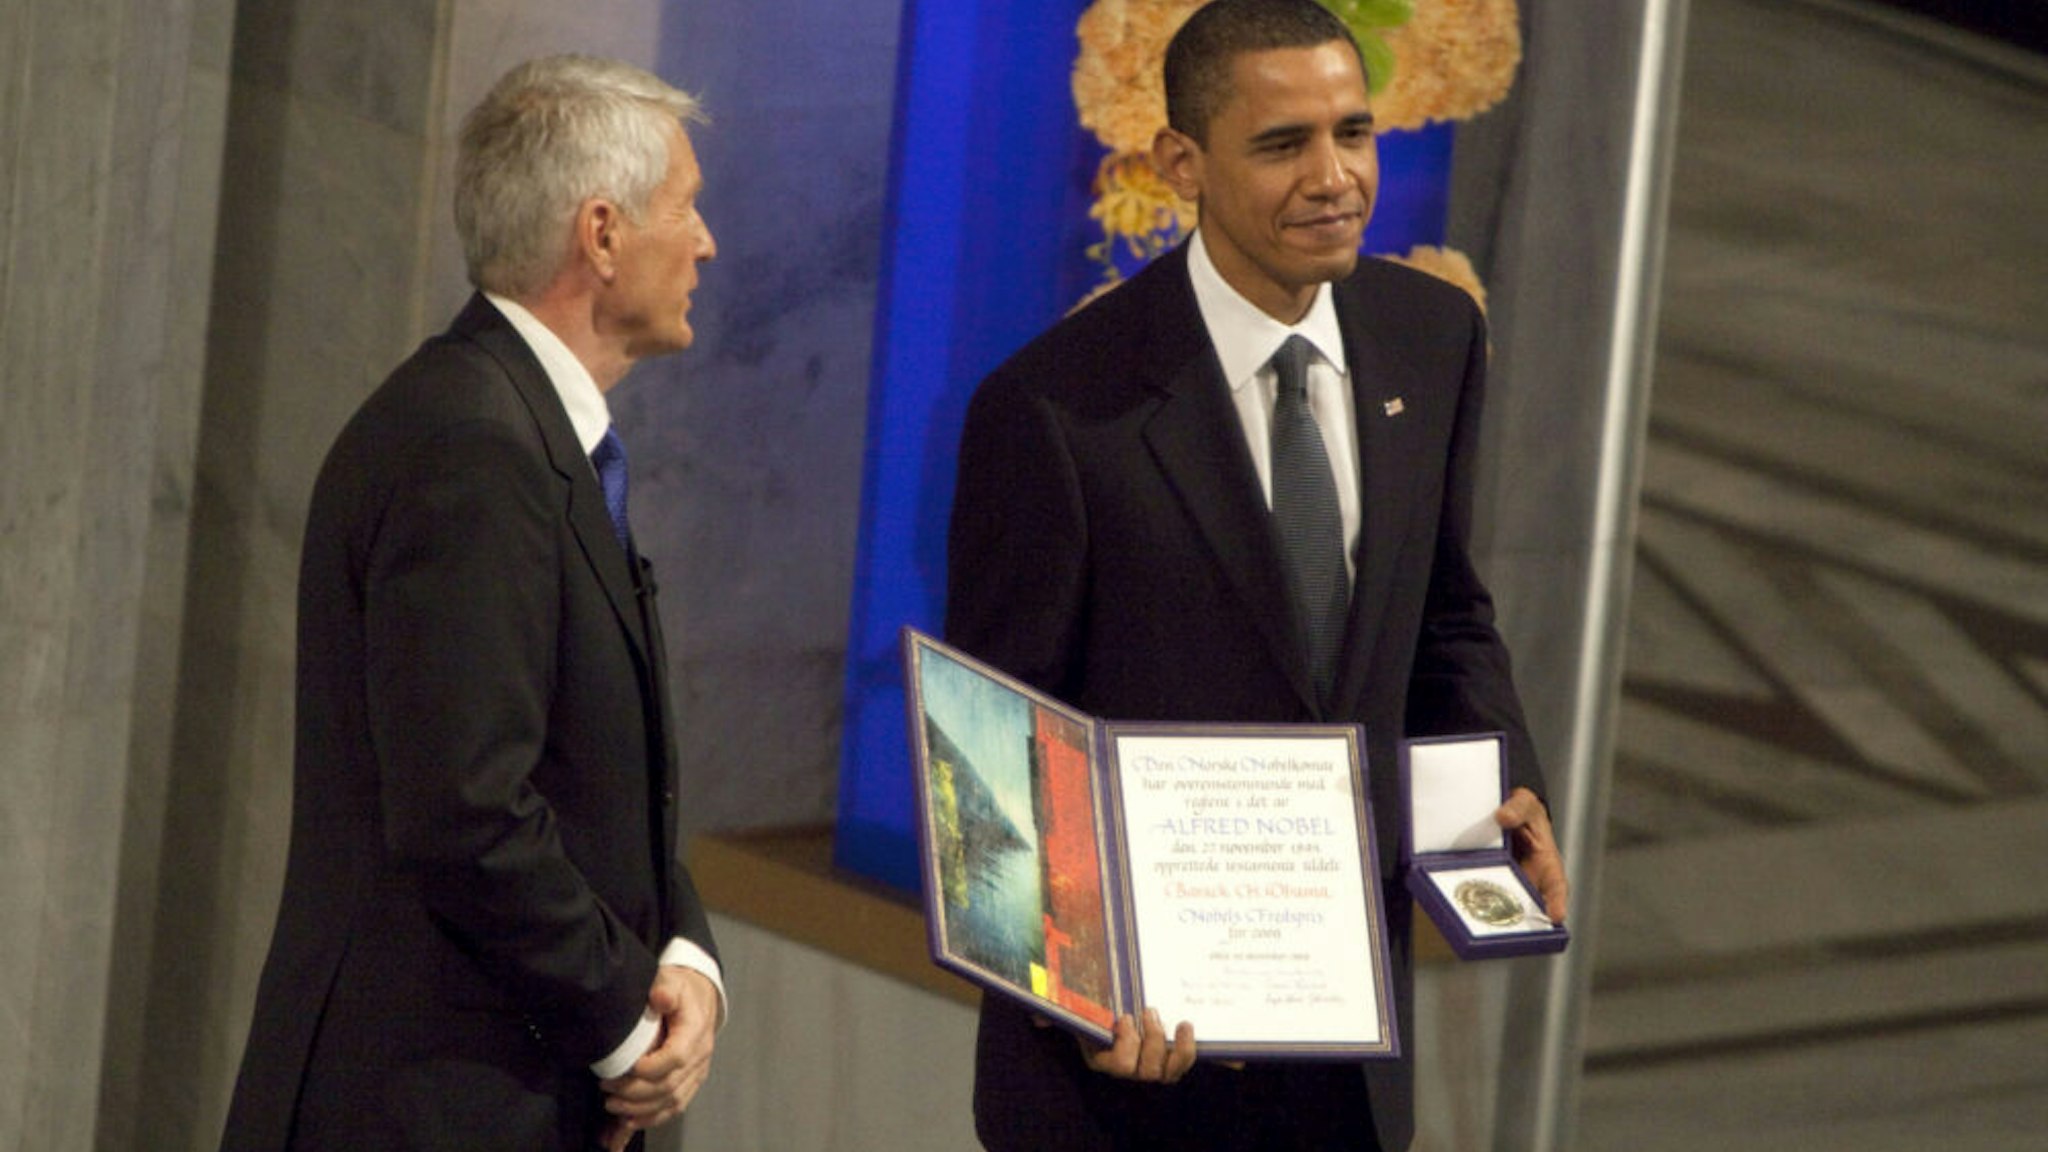 U.S. President Barack Obama, right, receives the Nobel Peace Prize from Thorbjoern Jagland, chairman of the Nobel committee, during a ceremony in Oslo, Norway, on Thursday, Dec.10, 2009. Obama accepted the Nobel Peace Prize, saying he is humbled by the award and receives it with an 'acute sense' of the cost of war.